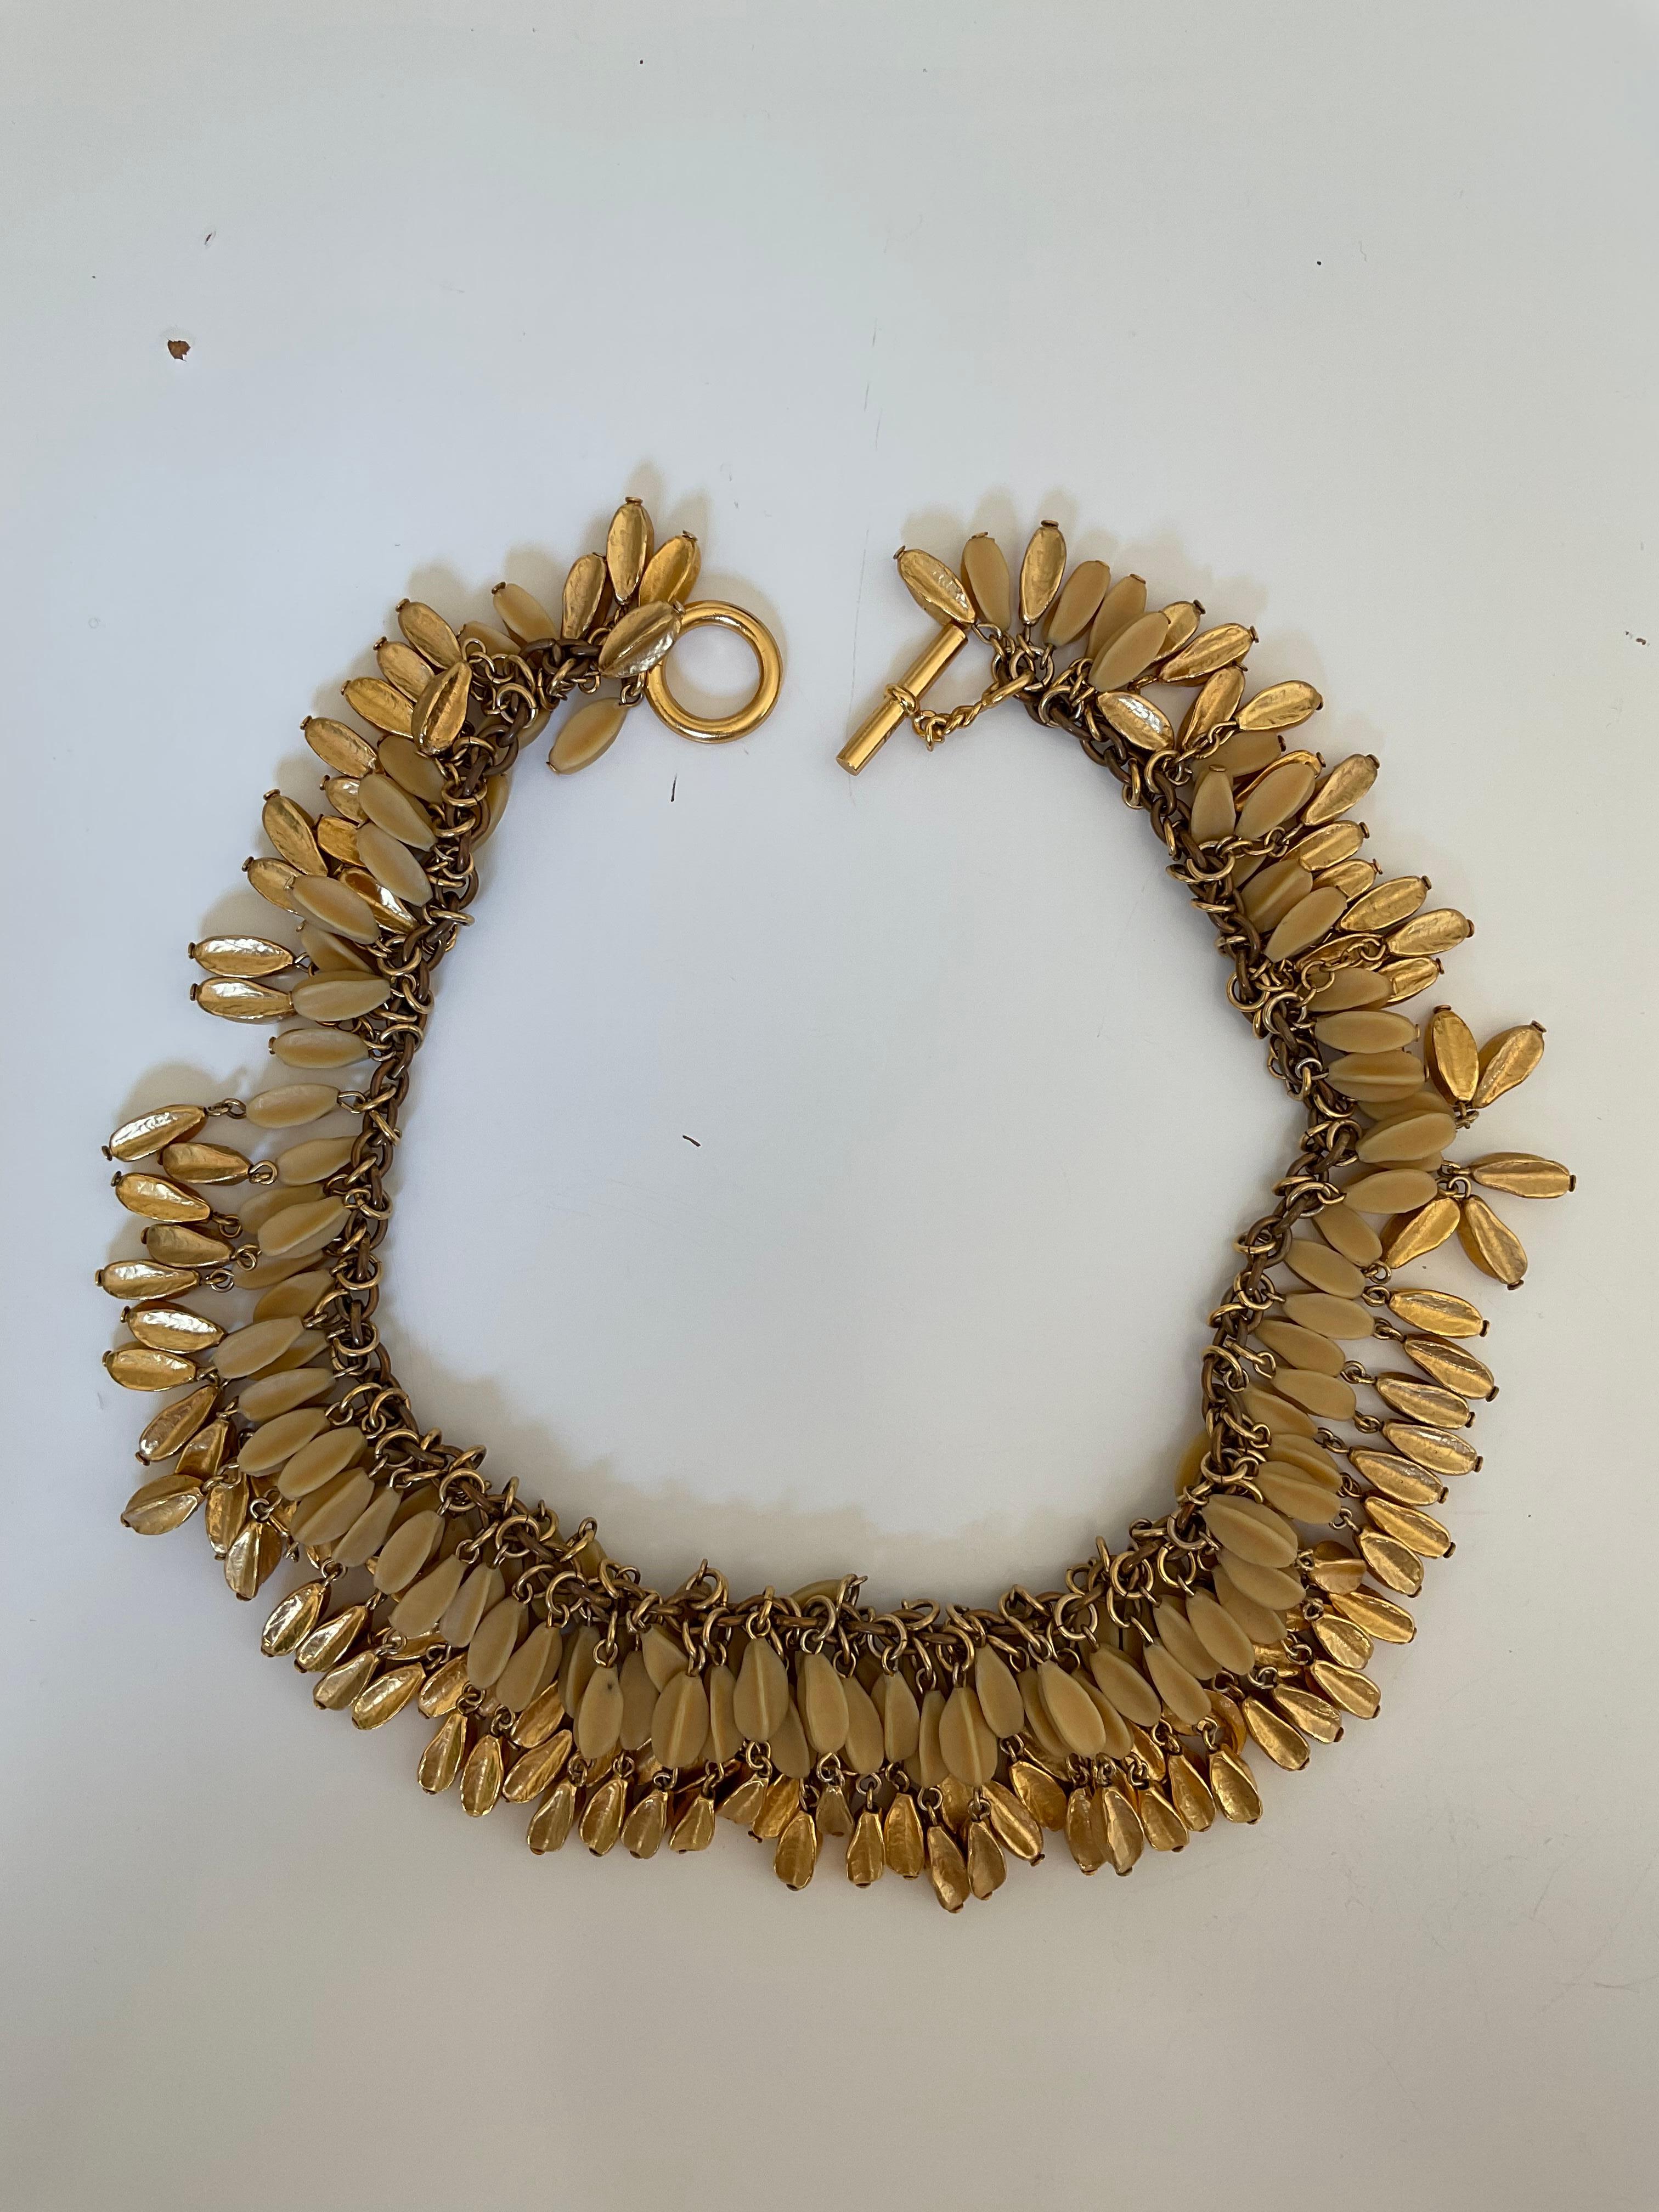 This rare necklace is a Vintage piece of the House of CHANEL from the 80's. The necklace is conceived with a gold-plated chain. It closes with a bar and a ring. All around the chain, there are tassels composed of ivory on the first row and gold